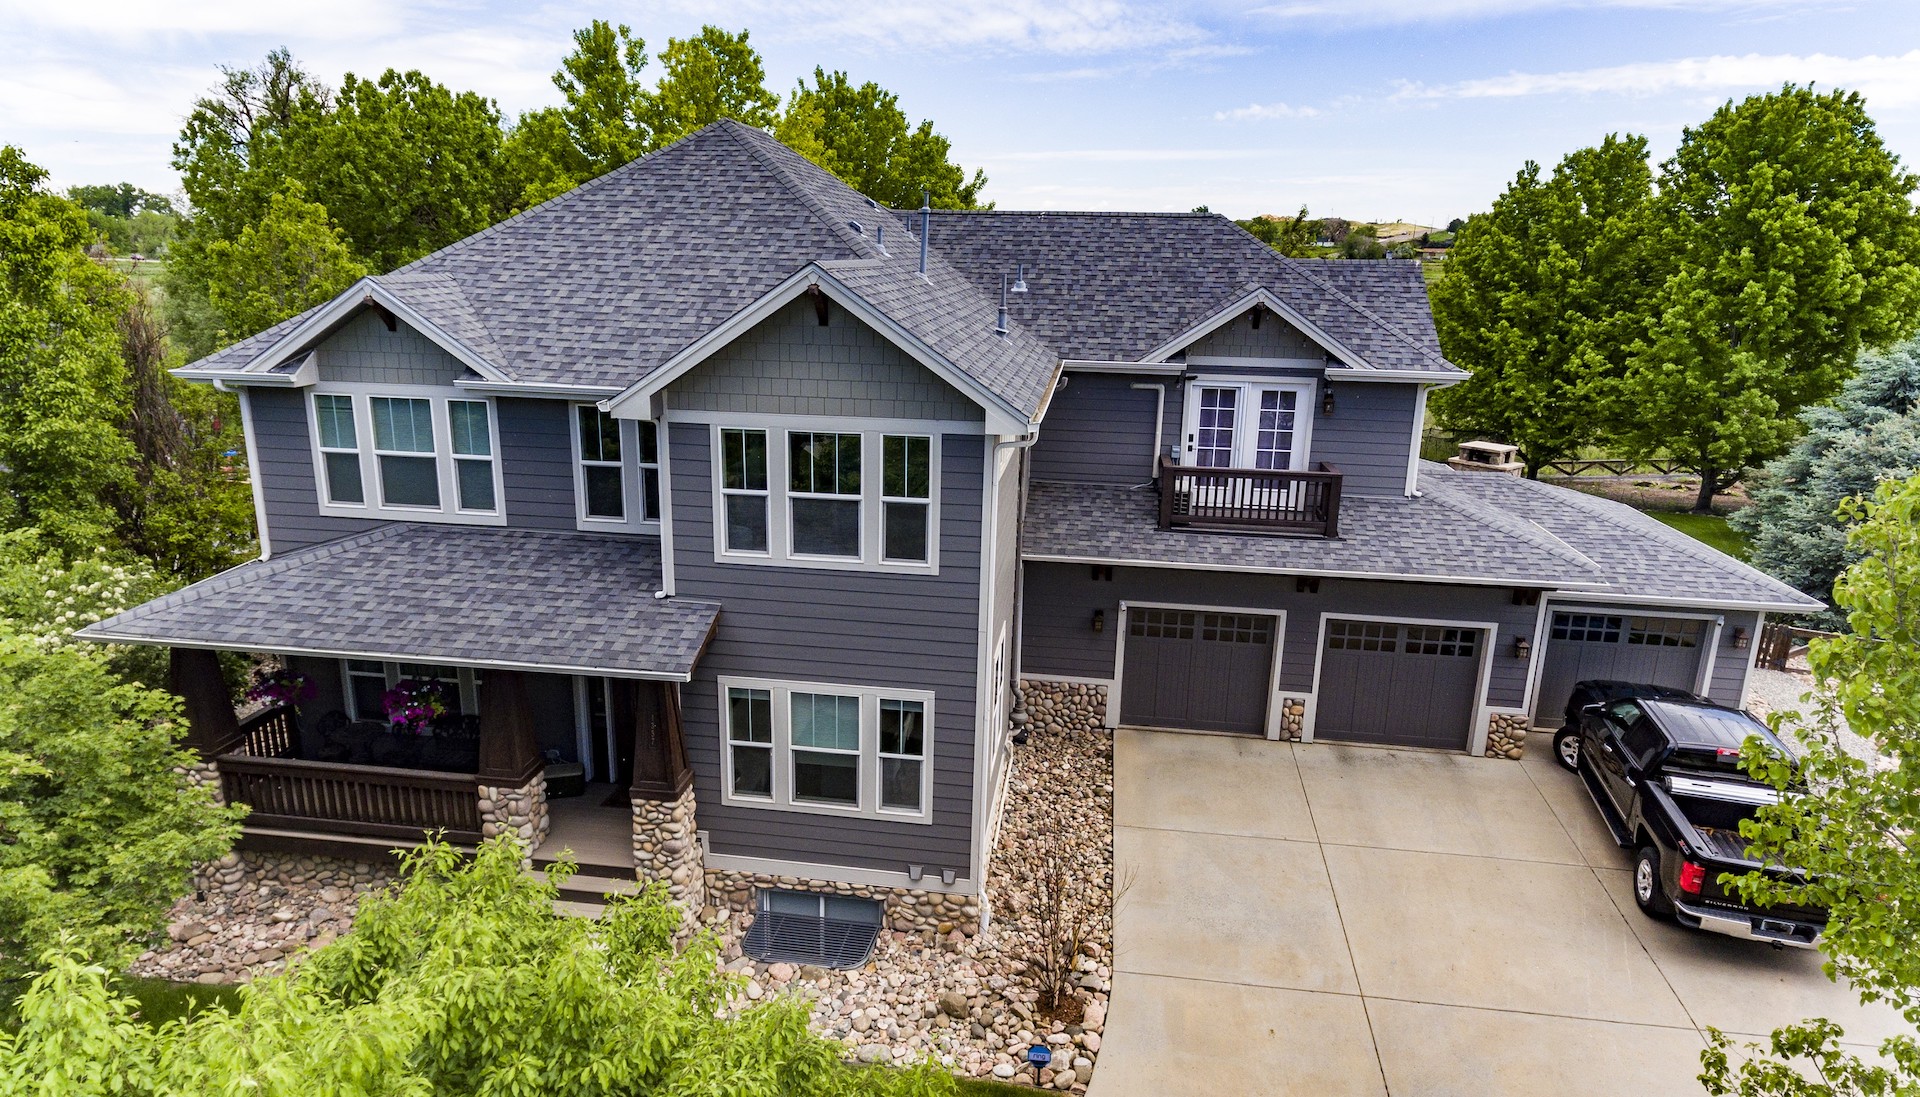 Erie, Colorado home with Aged Pewter shingles and artic white trim installed by Northern Lights Exteriors